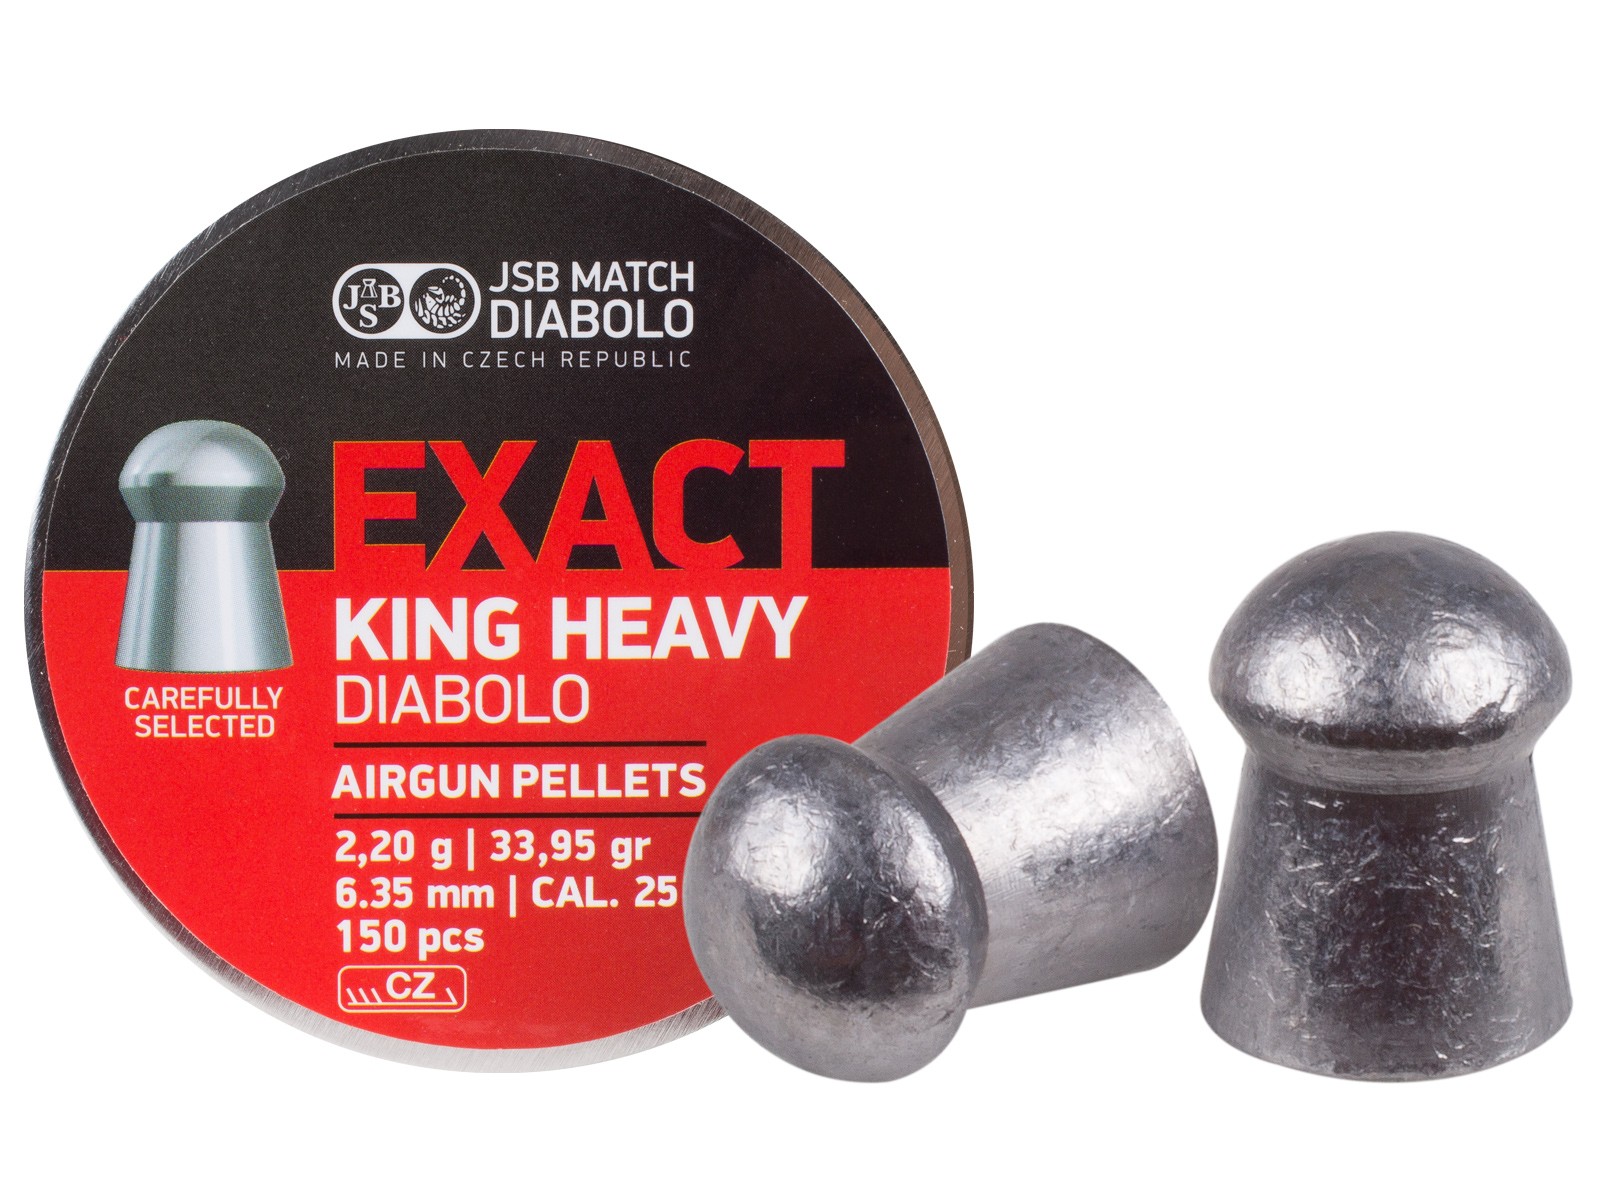 JSB Match Diabolo Exact King MKII Heavy .25 Cal, 33.95 Grains, Domed, 150ct 0.25